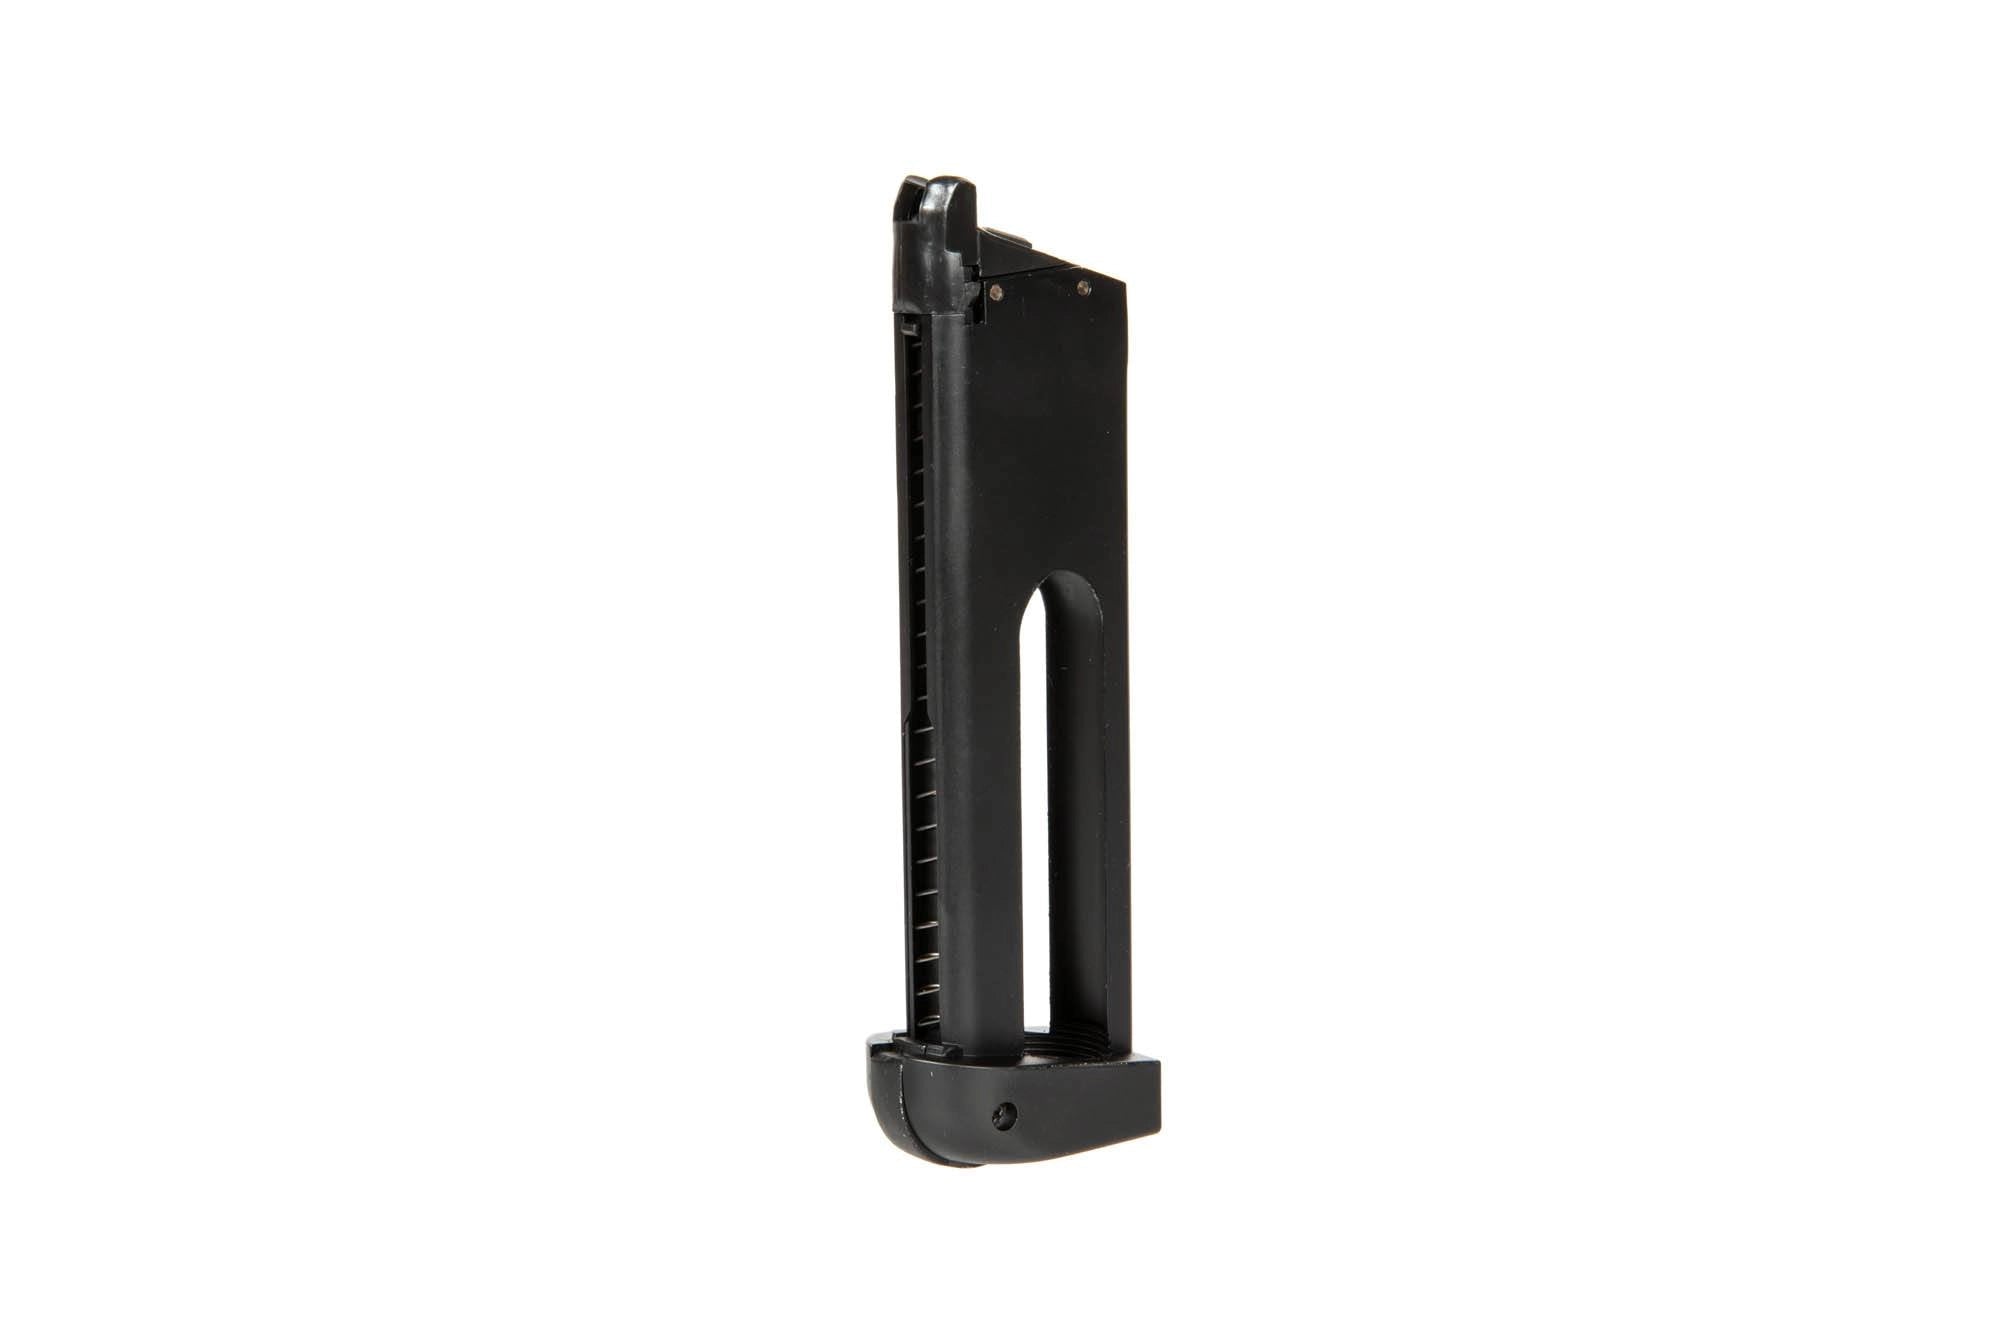 CO2 27 BB Magazine for Double Bell 823 (M1911) Replicas